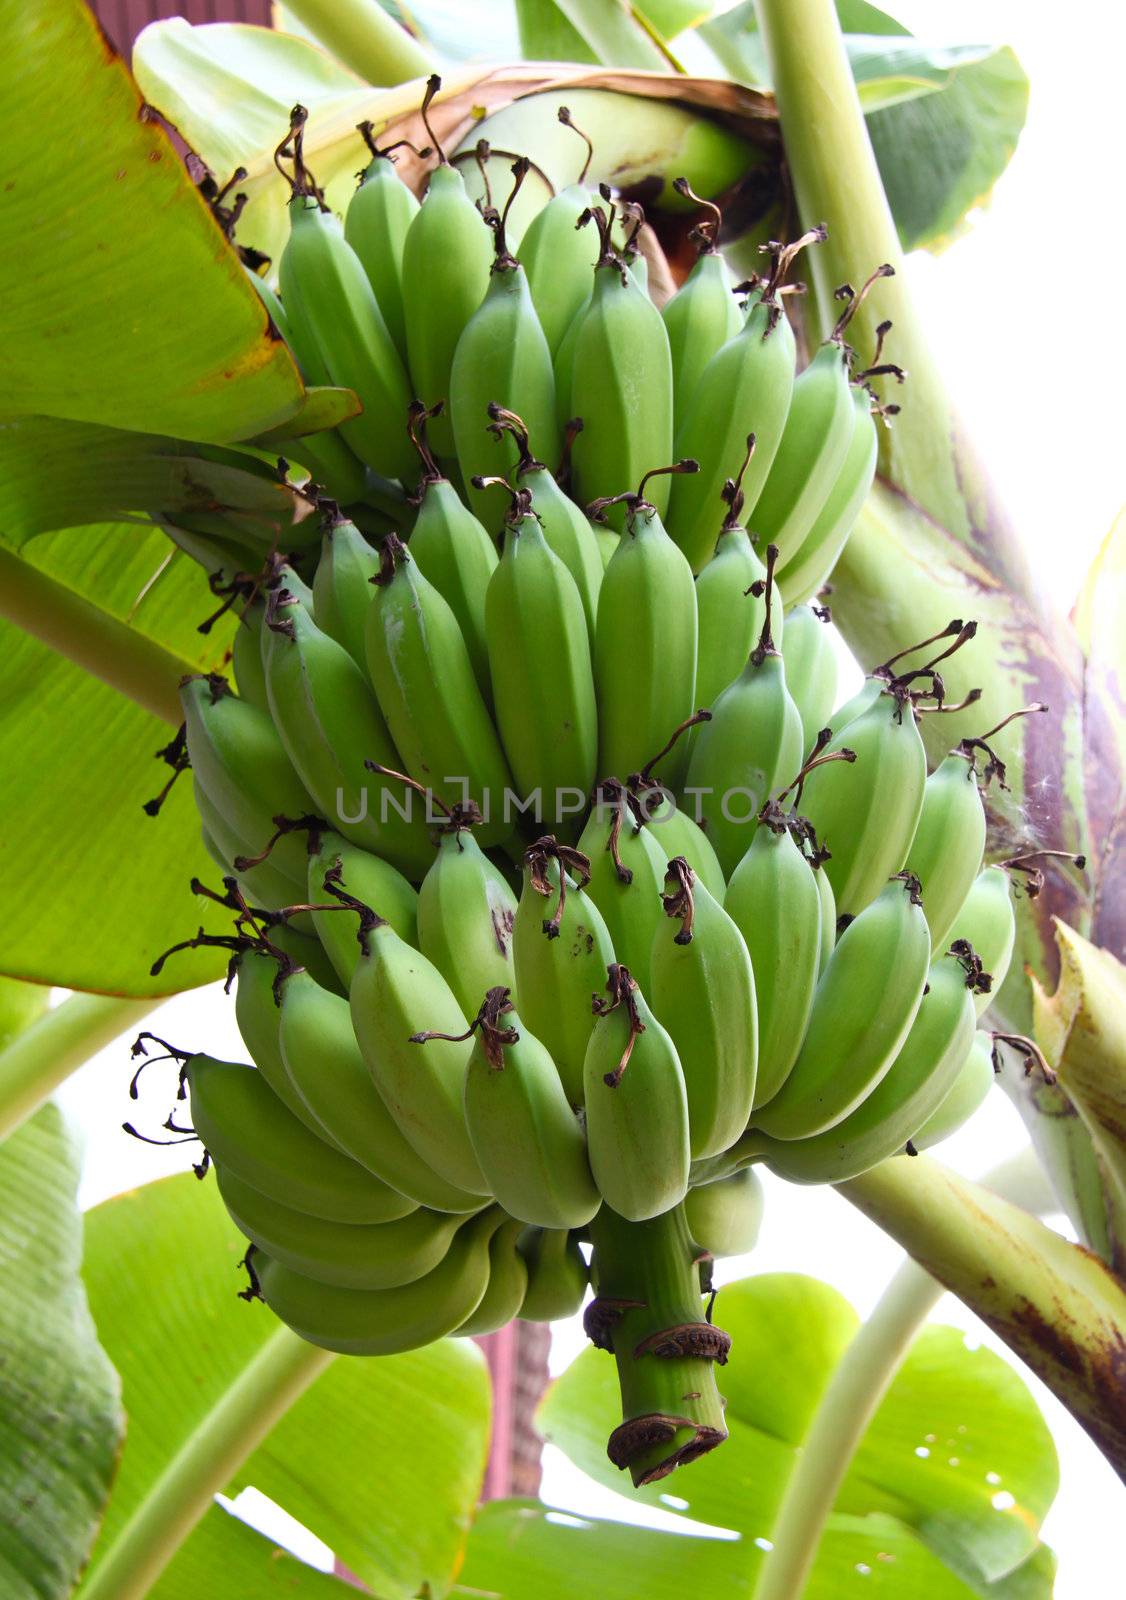 Green bananas on a tree  by nuchylee